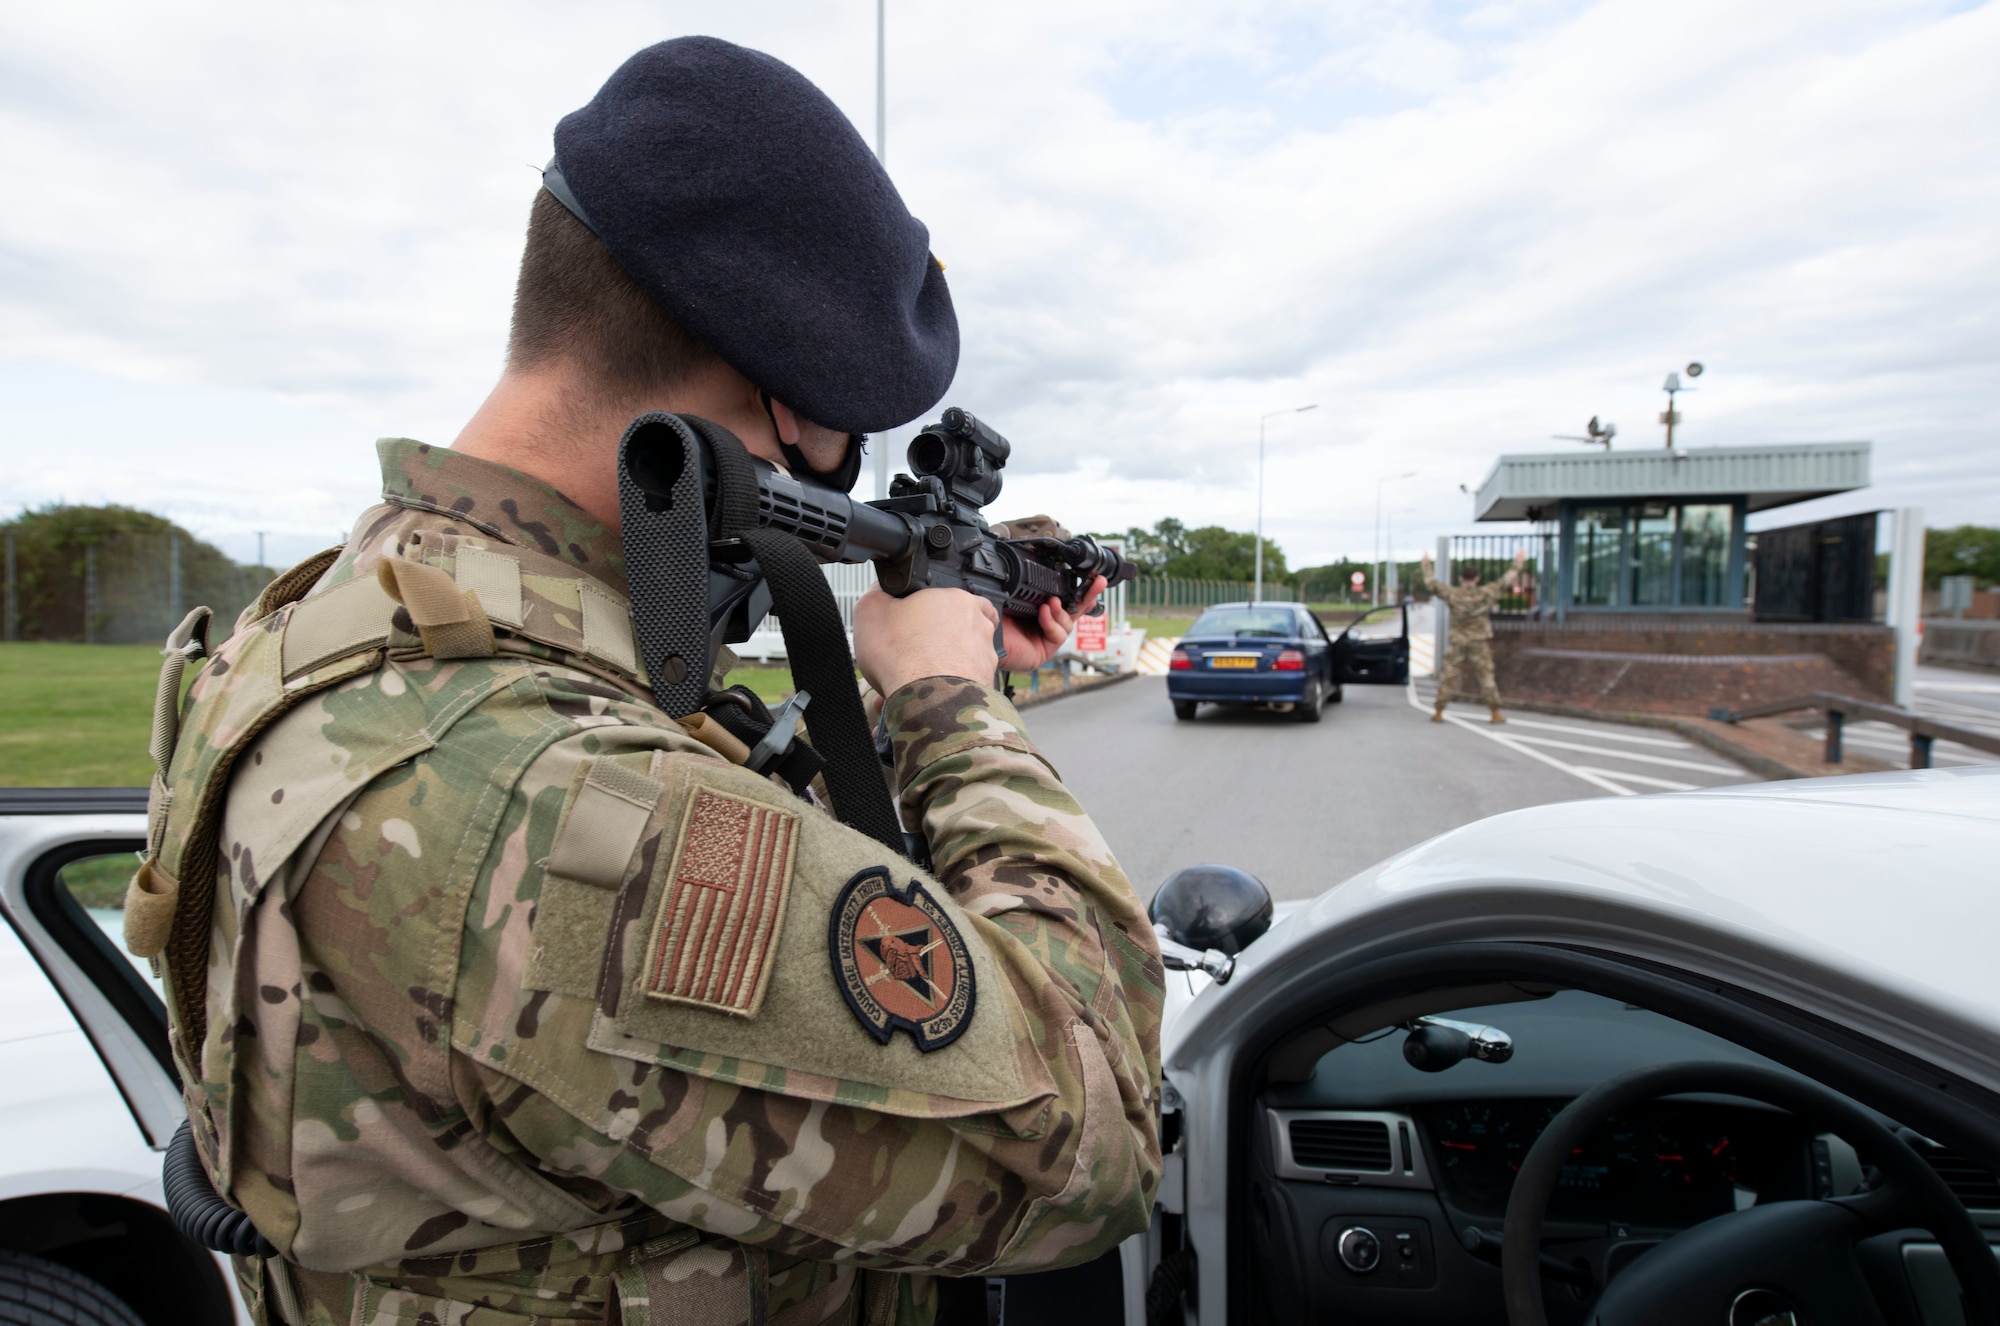 U.S. Air Force Staff Sgt. Derek Ricks, 423rd Security Forces Squadron (SFS) patrolman, conducts a high risk vehicle challenge during a training exercise at RAF Molesworth, England, July 28, 2020. 423rd SFS defenders conduct regular training and exercises to ensure mission readiness. (U.S. Air Force photo by Airman 1st Class Jennifer Zima)